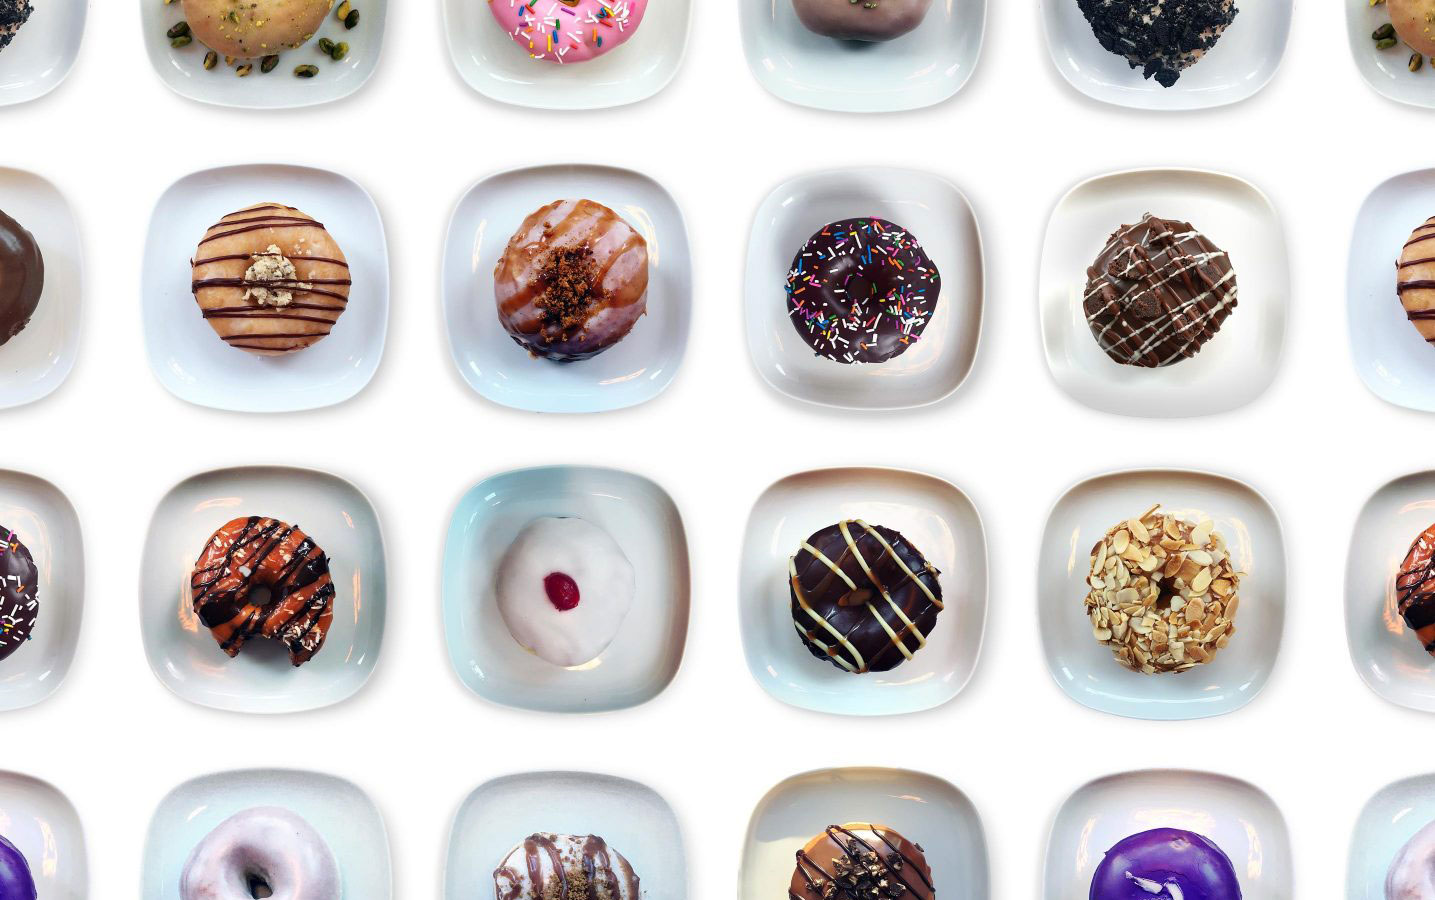 Composite image of many plates of doughnuts in a variety of unique flavours.